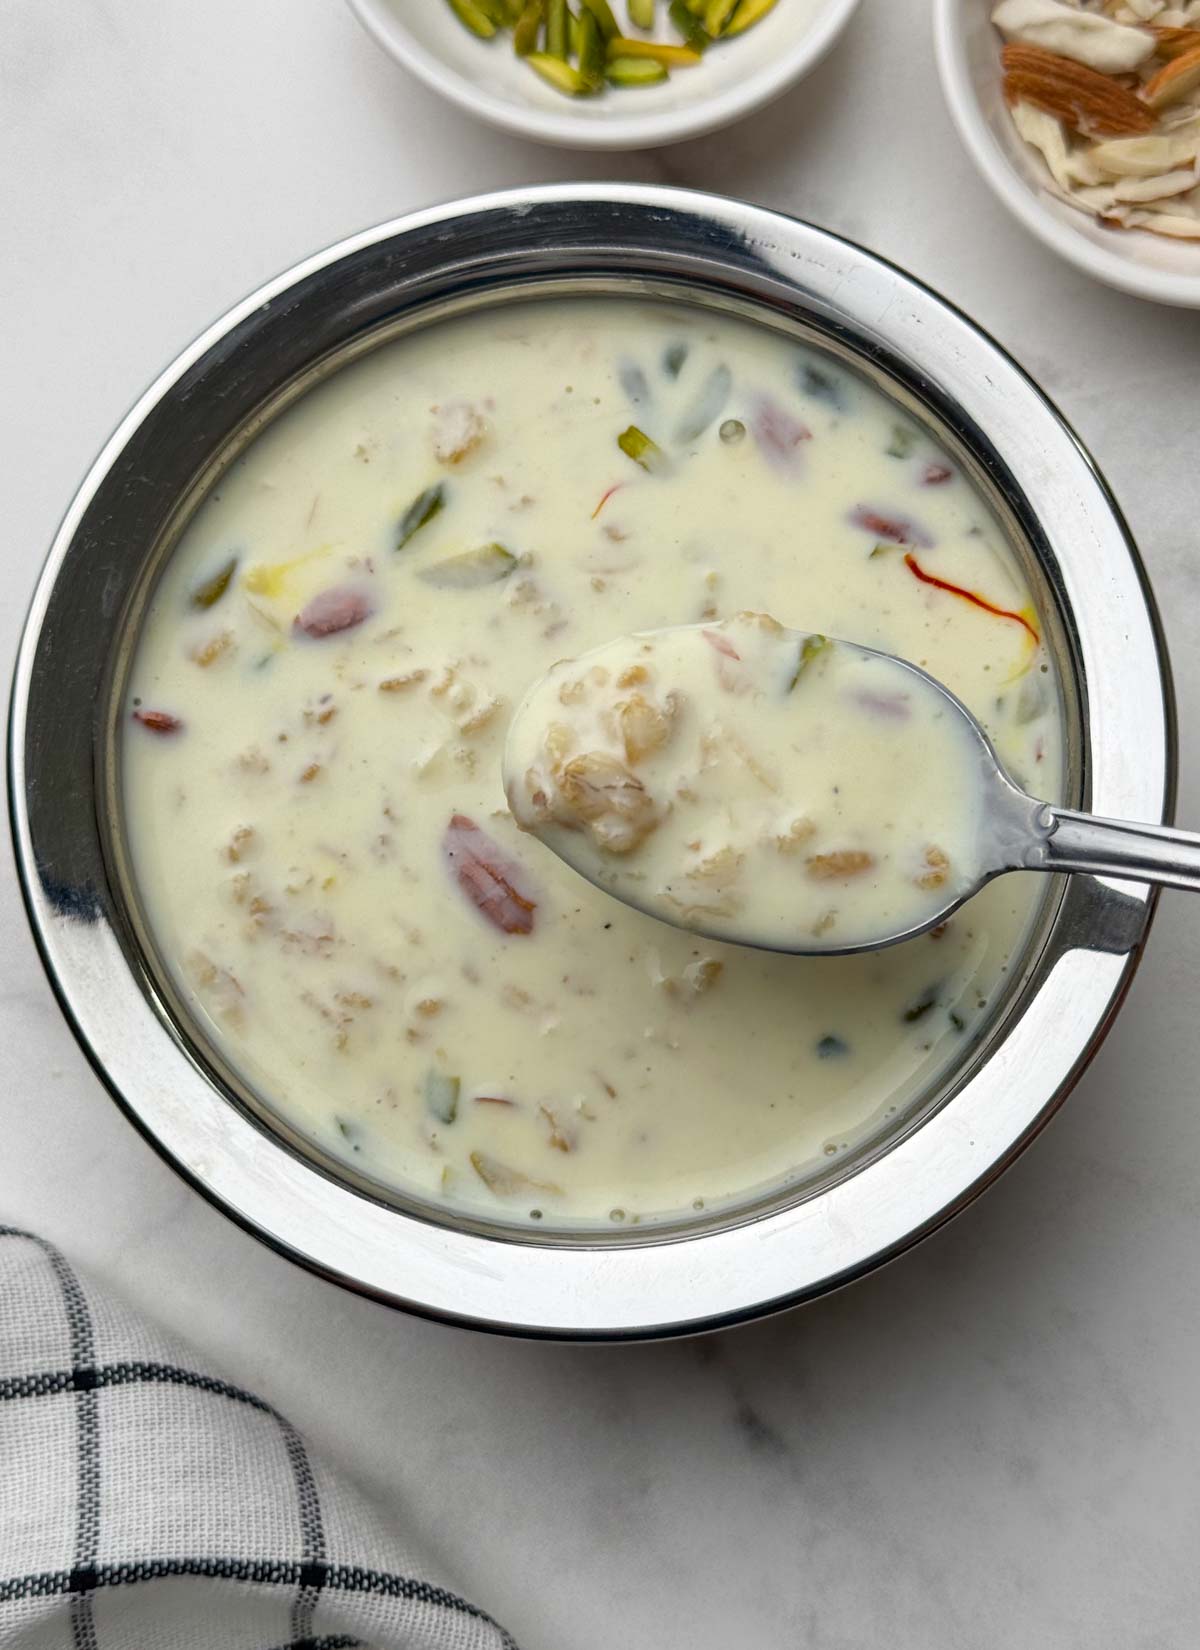 rolled oats payasam in a spoon